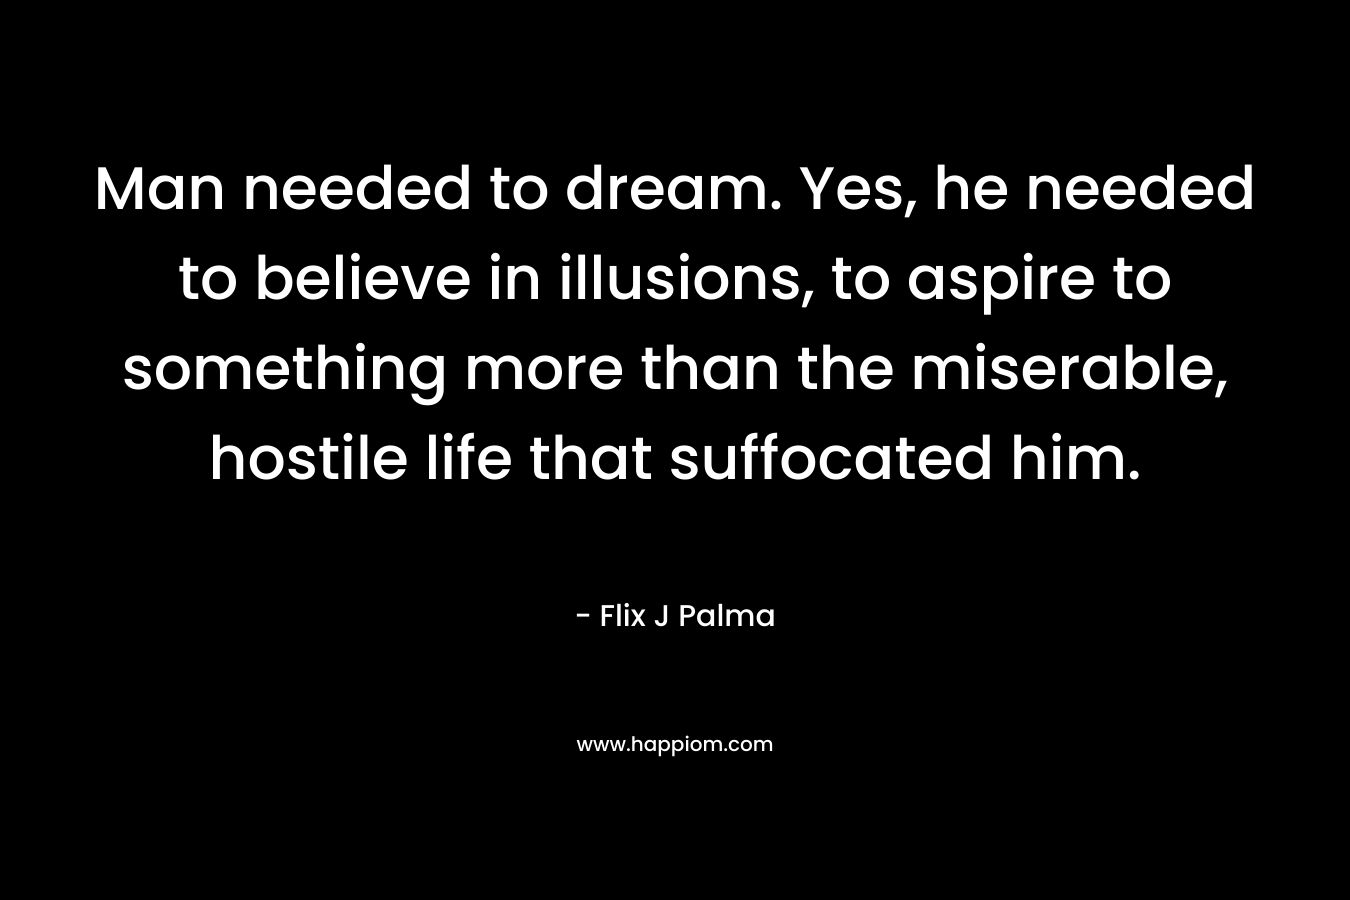 Man needed to dream. Yes, he needed to believe in illusions, to aspire to something more than the miserable, hostile life that suffocated him.